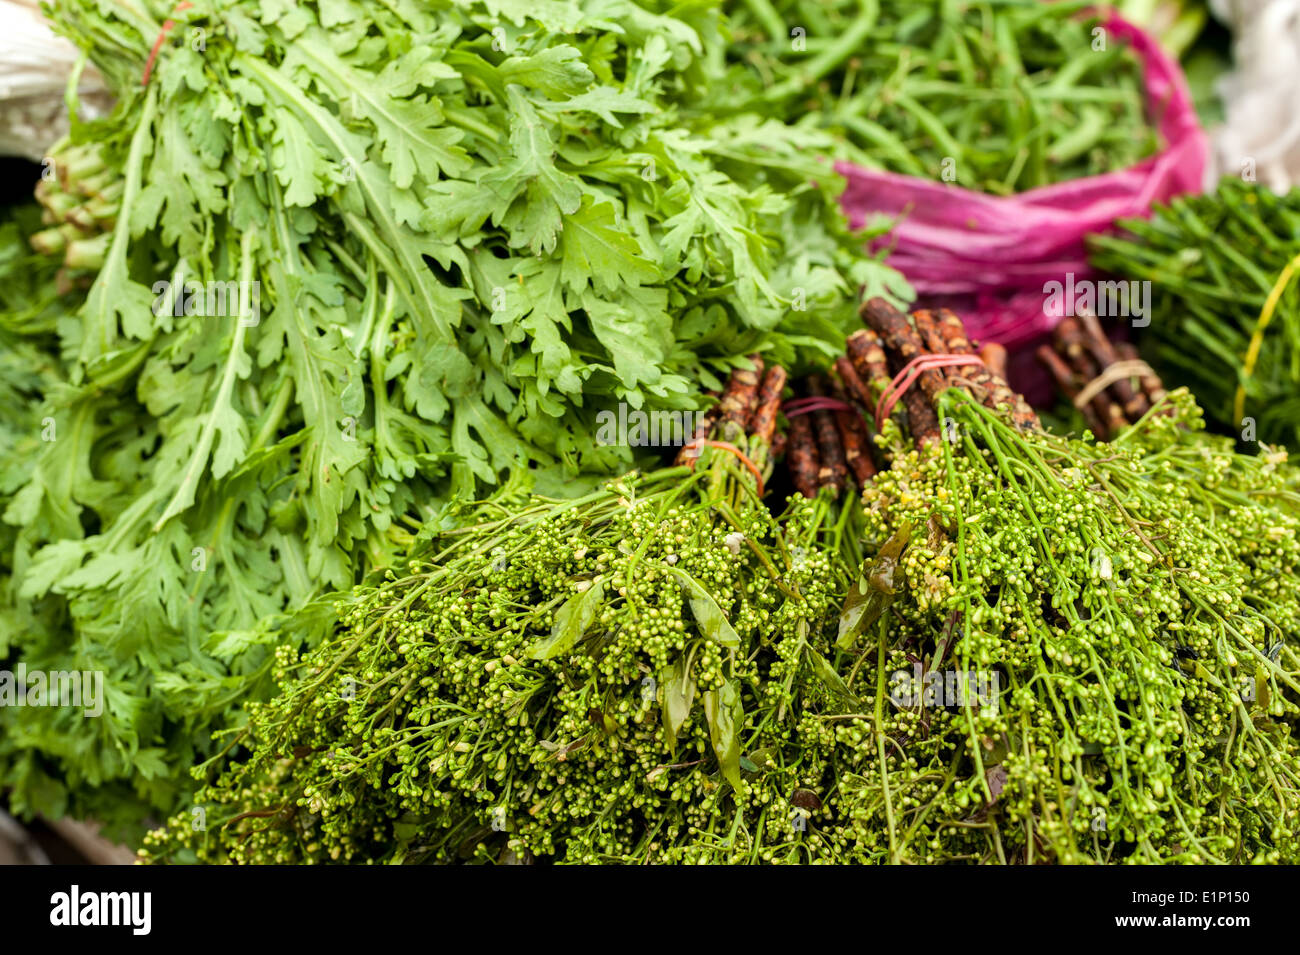 Fresh organic herbs and spices at asian market Stock Photo